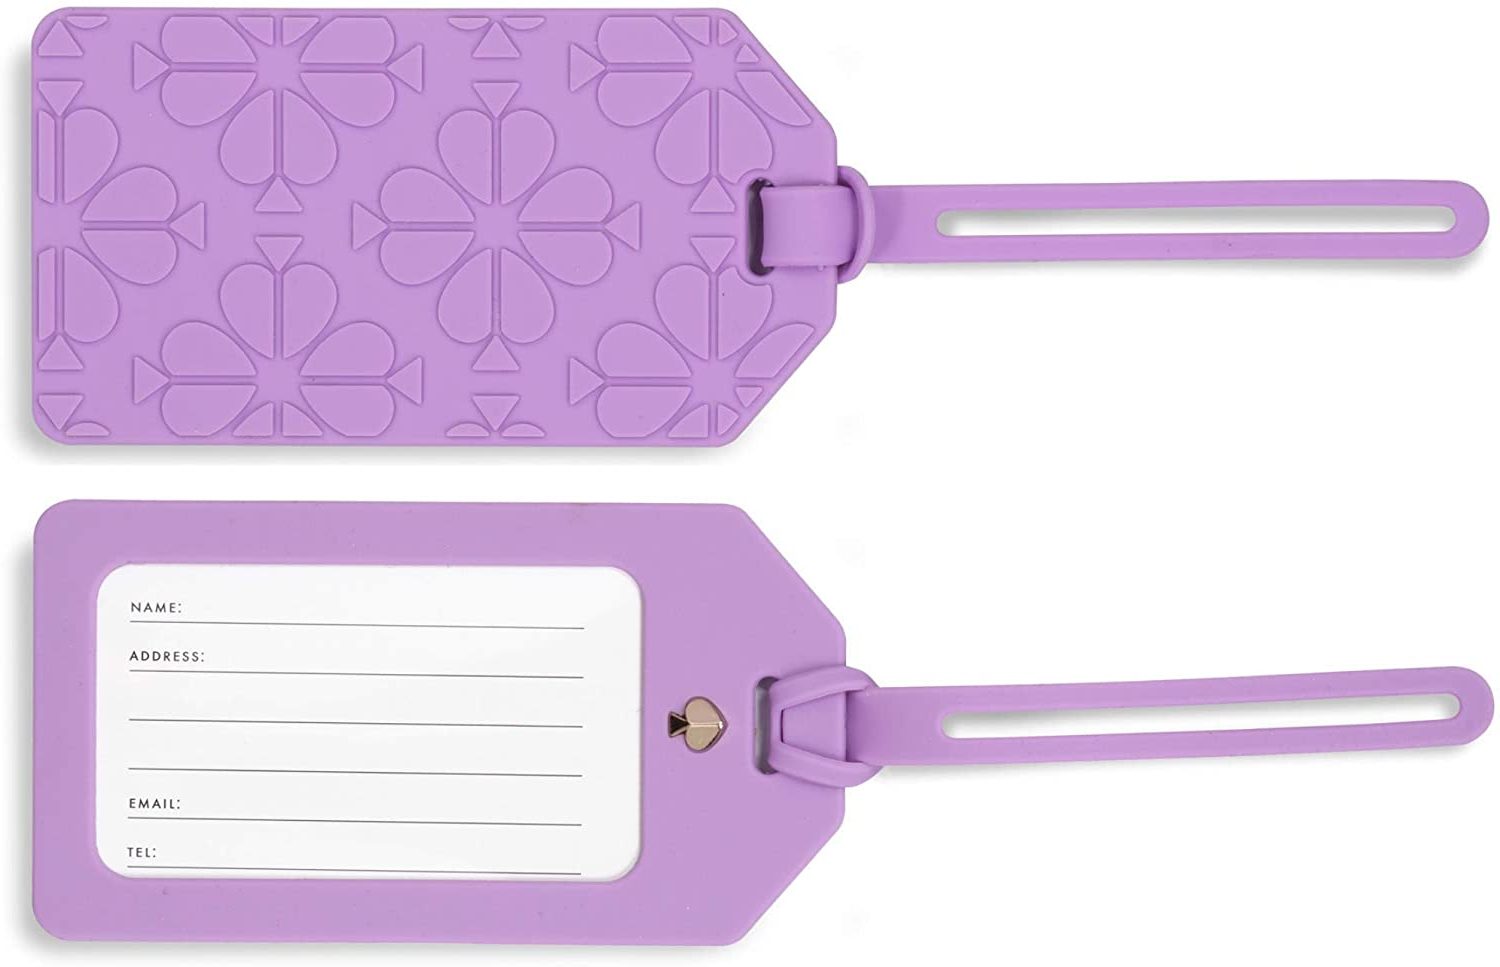 Best Silicone Kate Spade New York Silicone Luggage Tag